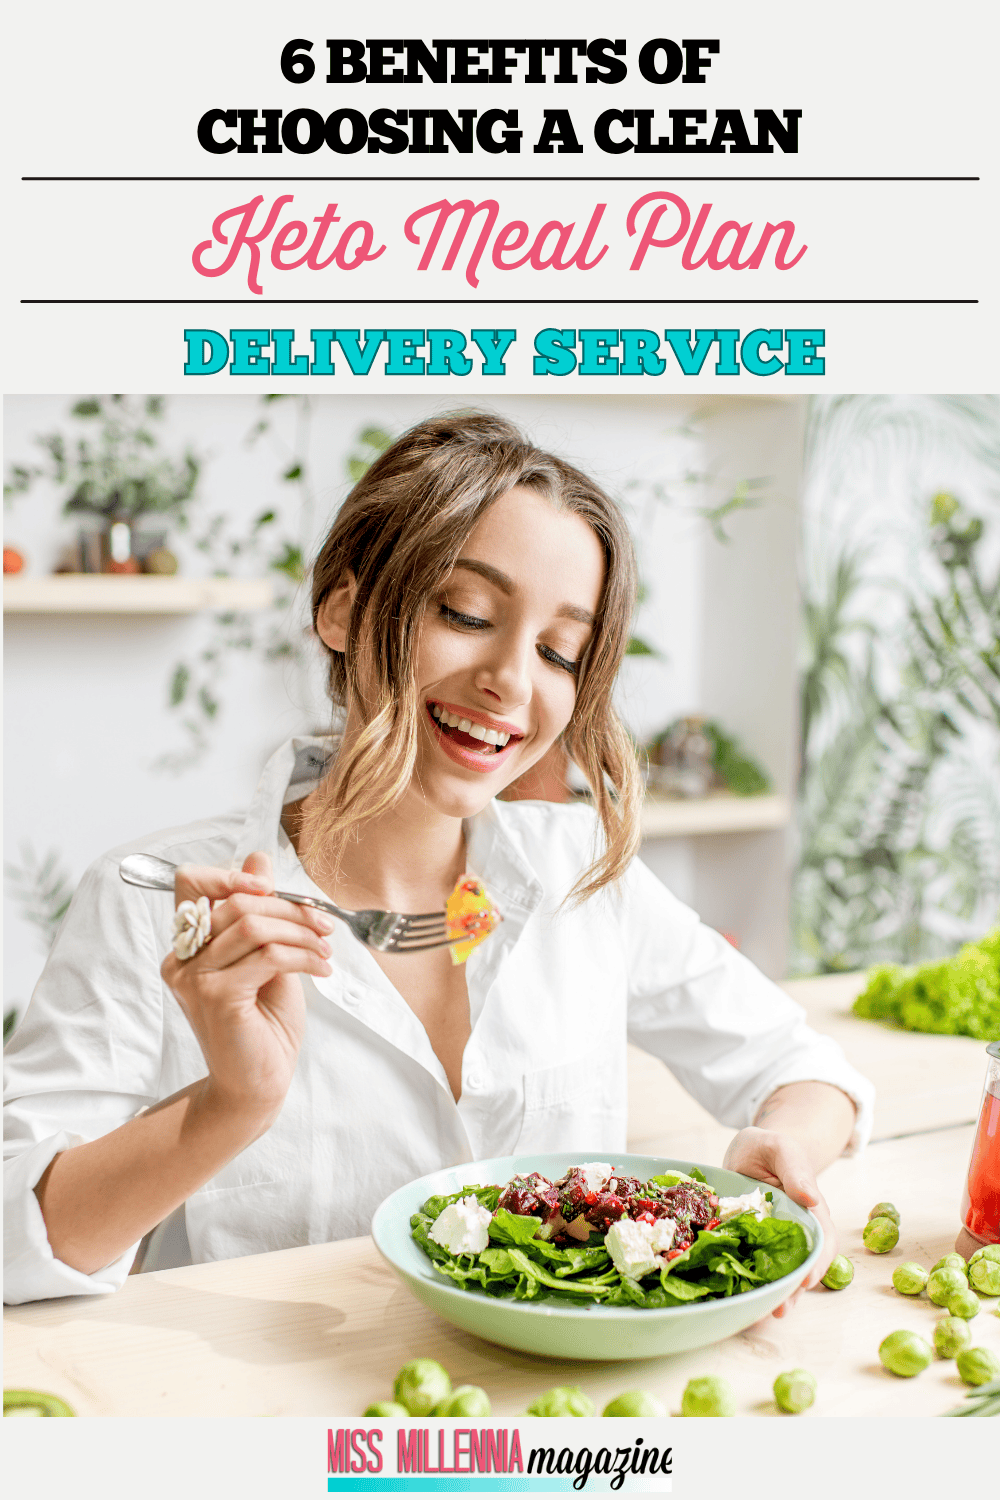 6 Benefits of Choosing a Clean Keto Meal Plan Delivery Service